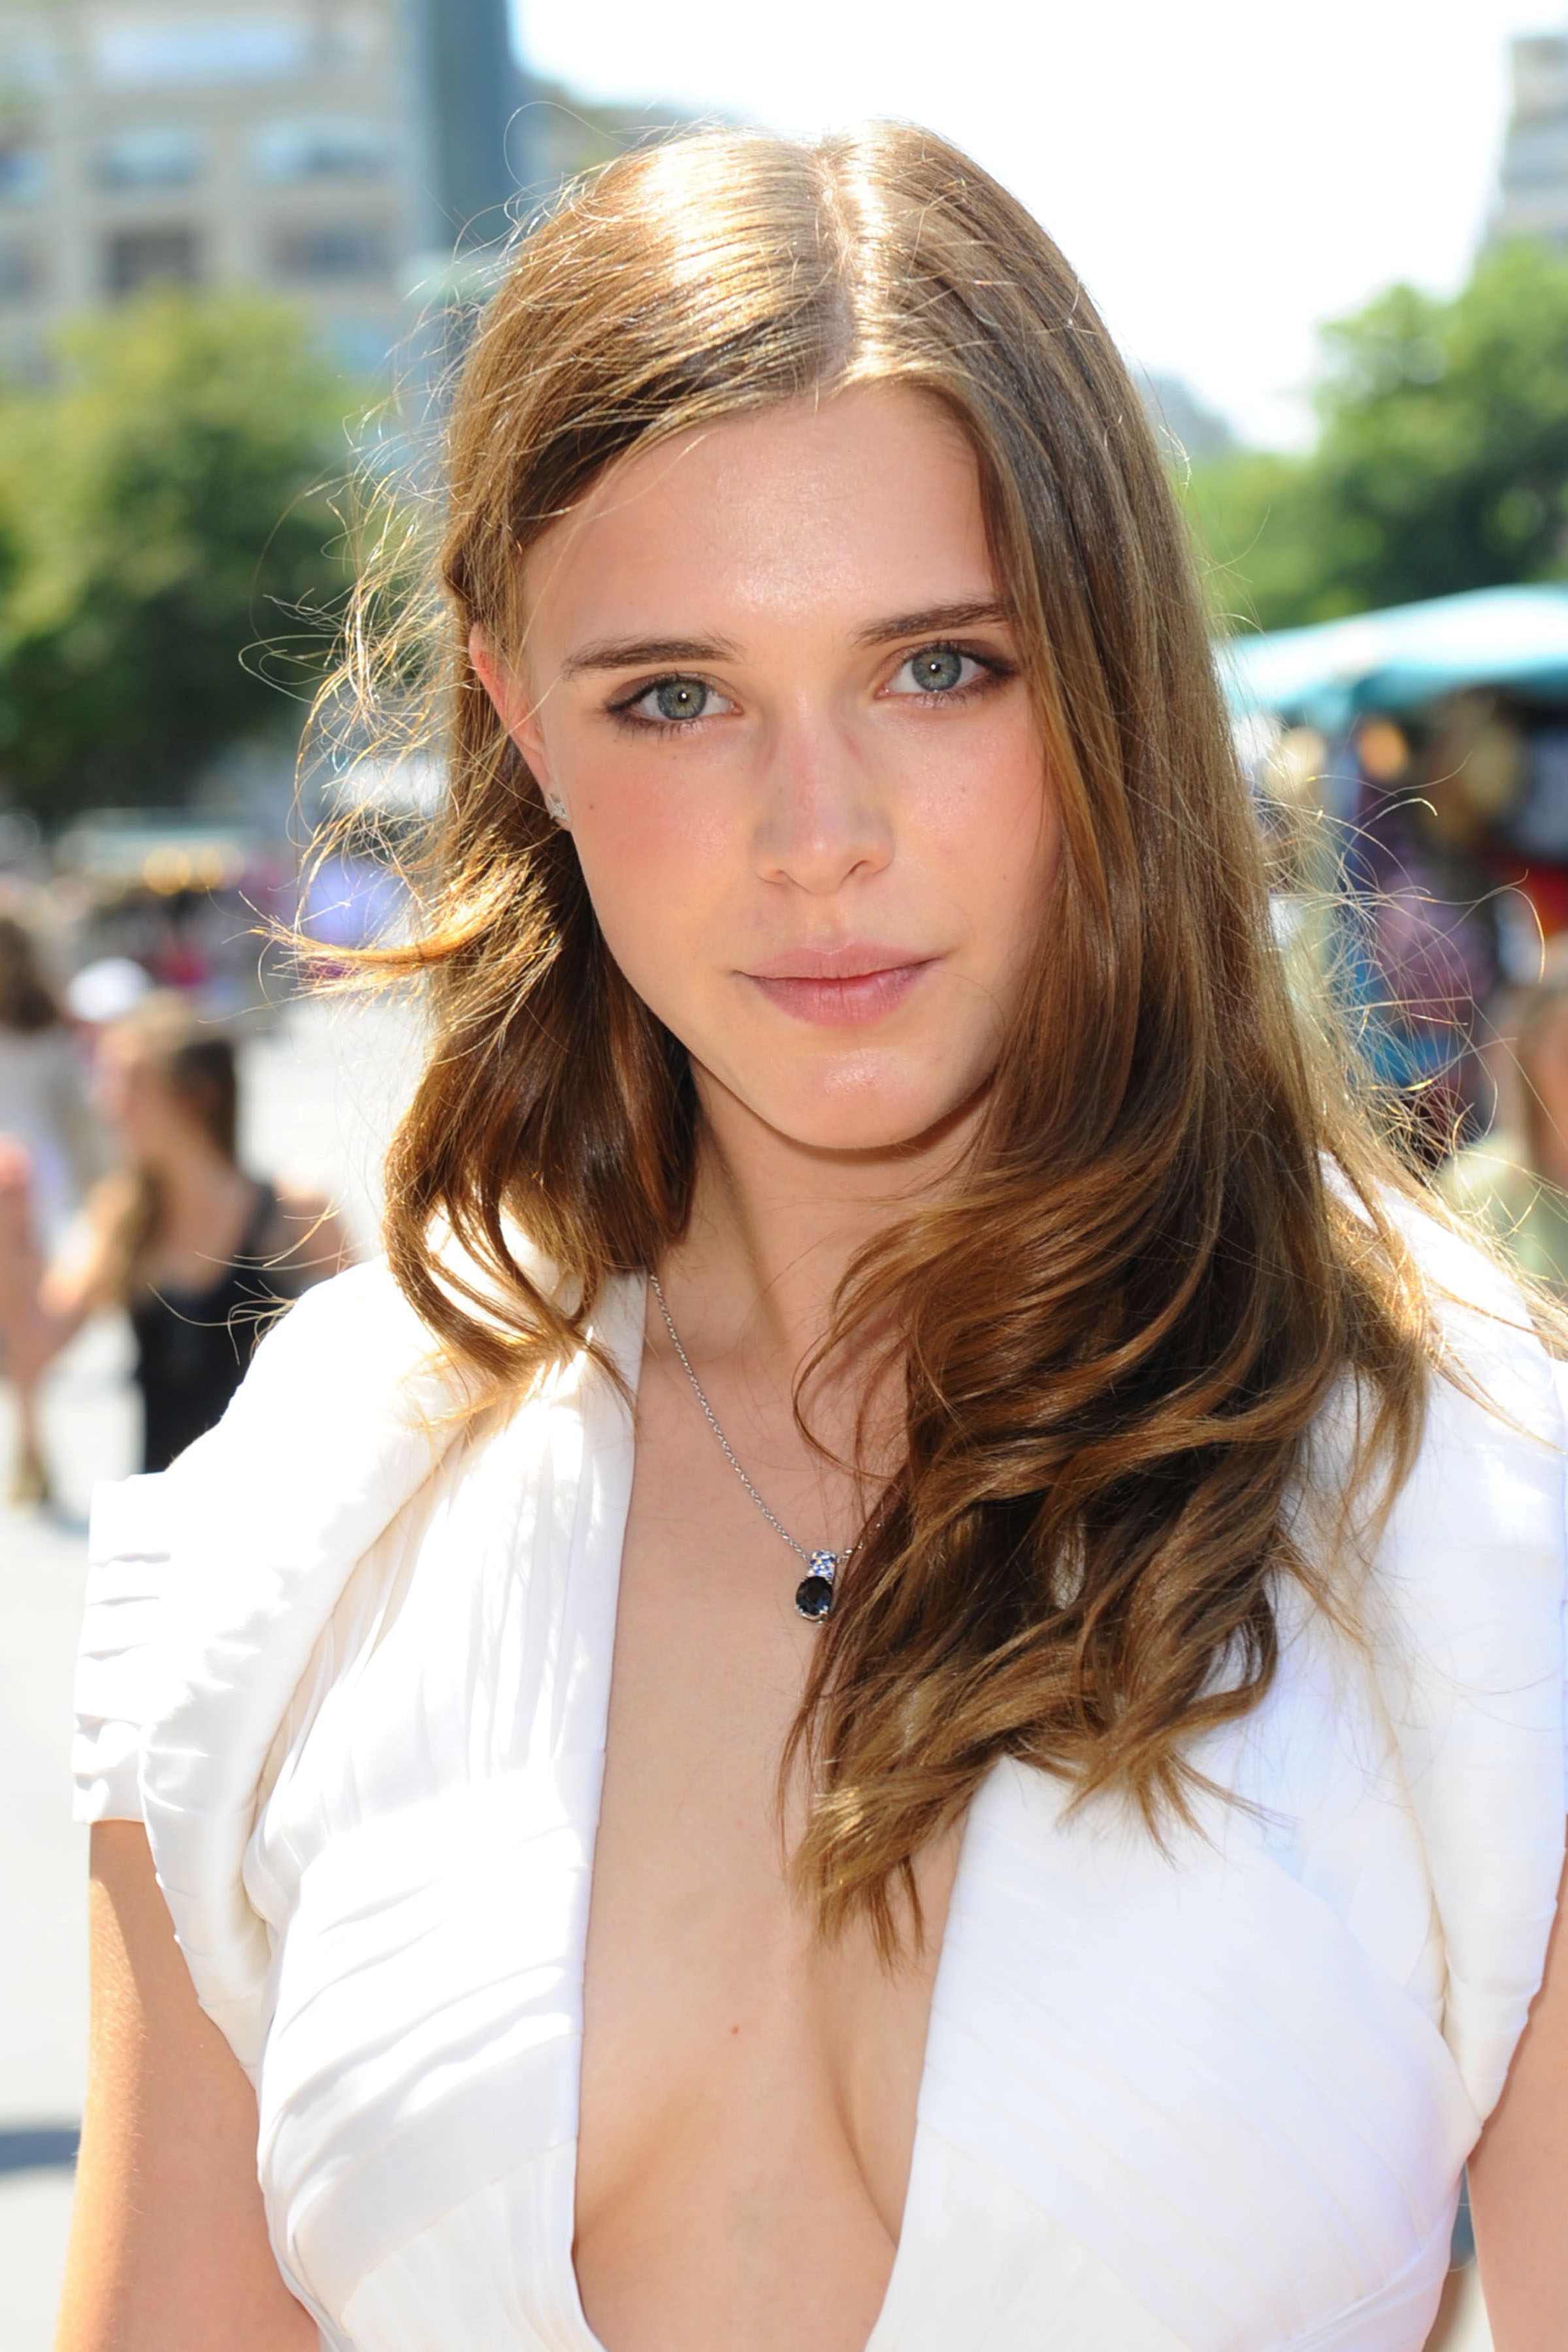 Naked Gaia Weiss Added By Momusicman